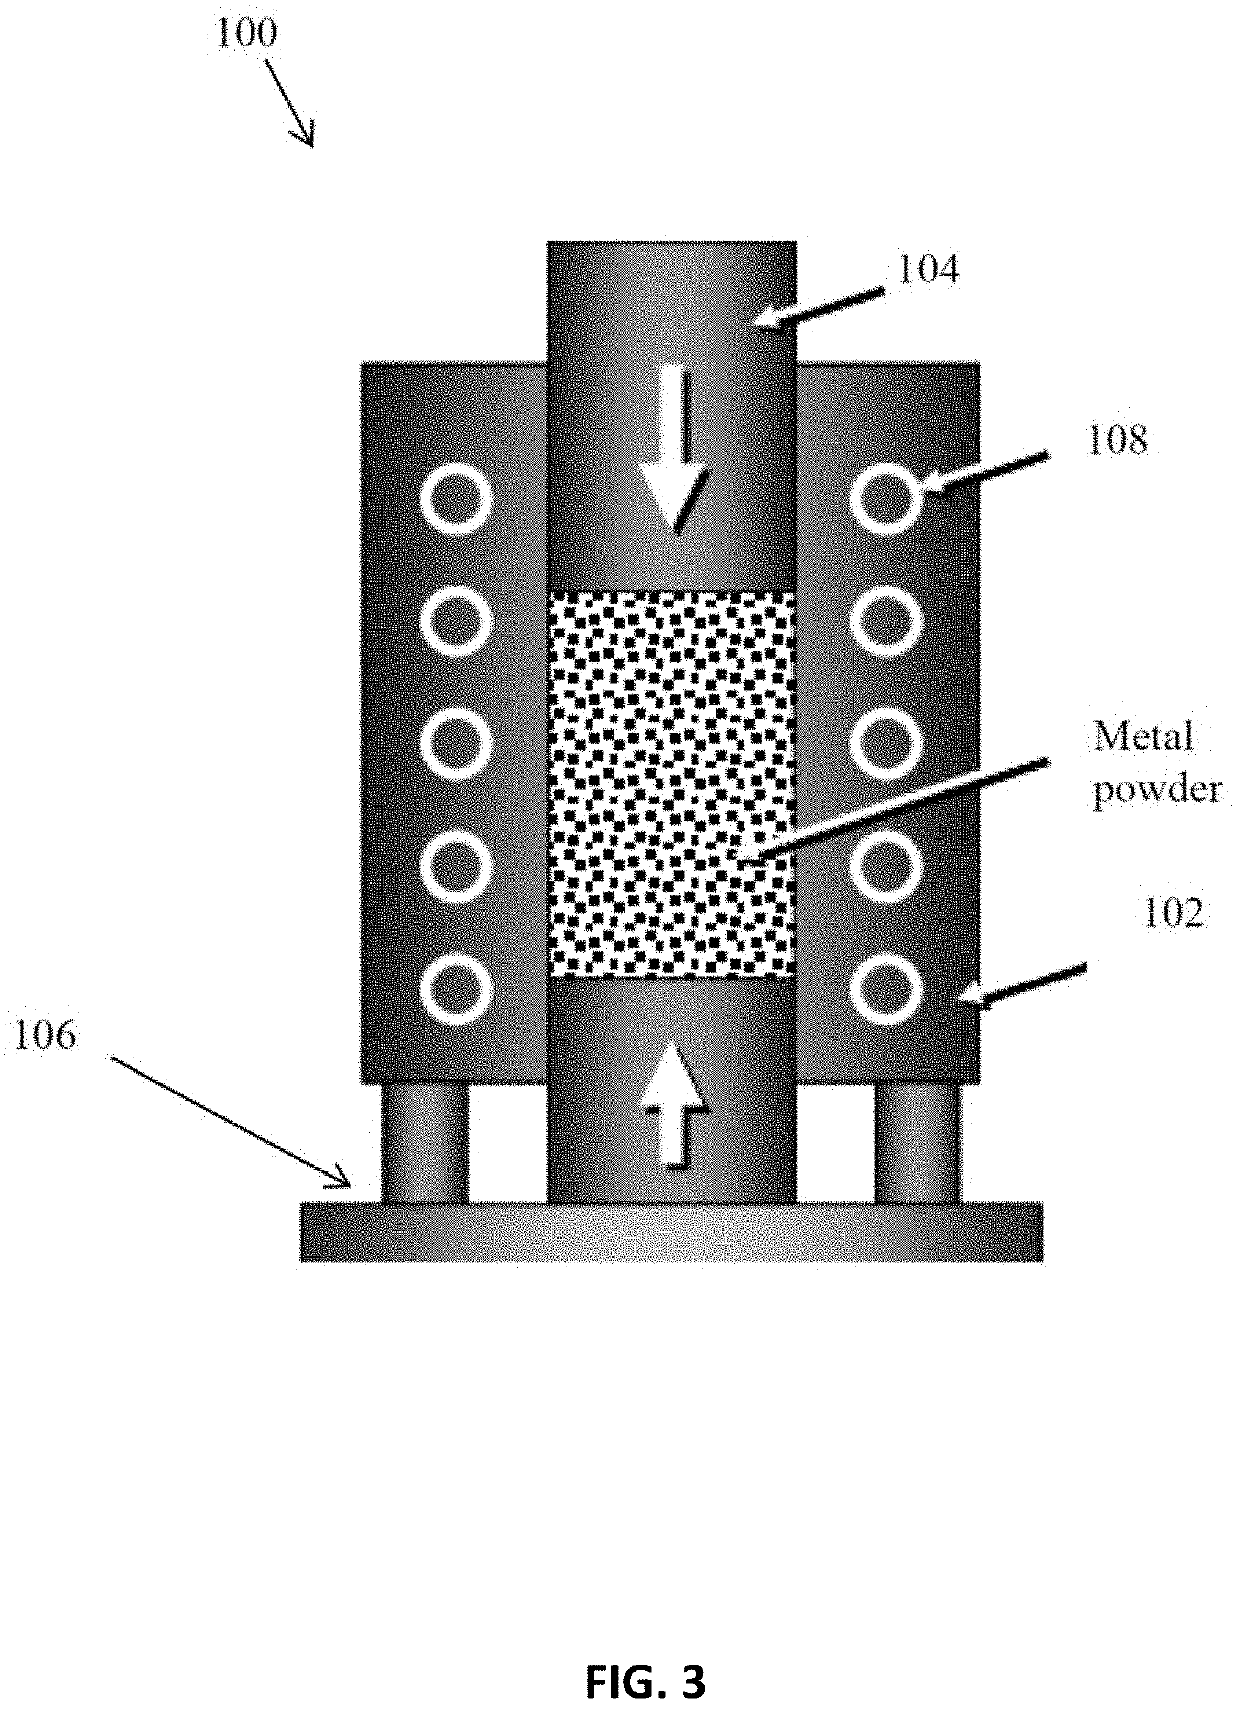 Cold sintering process for densification and sintering of powdered metals